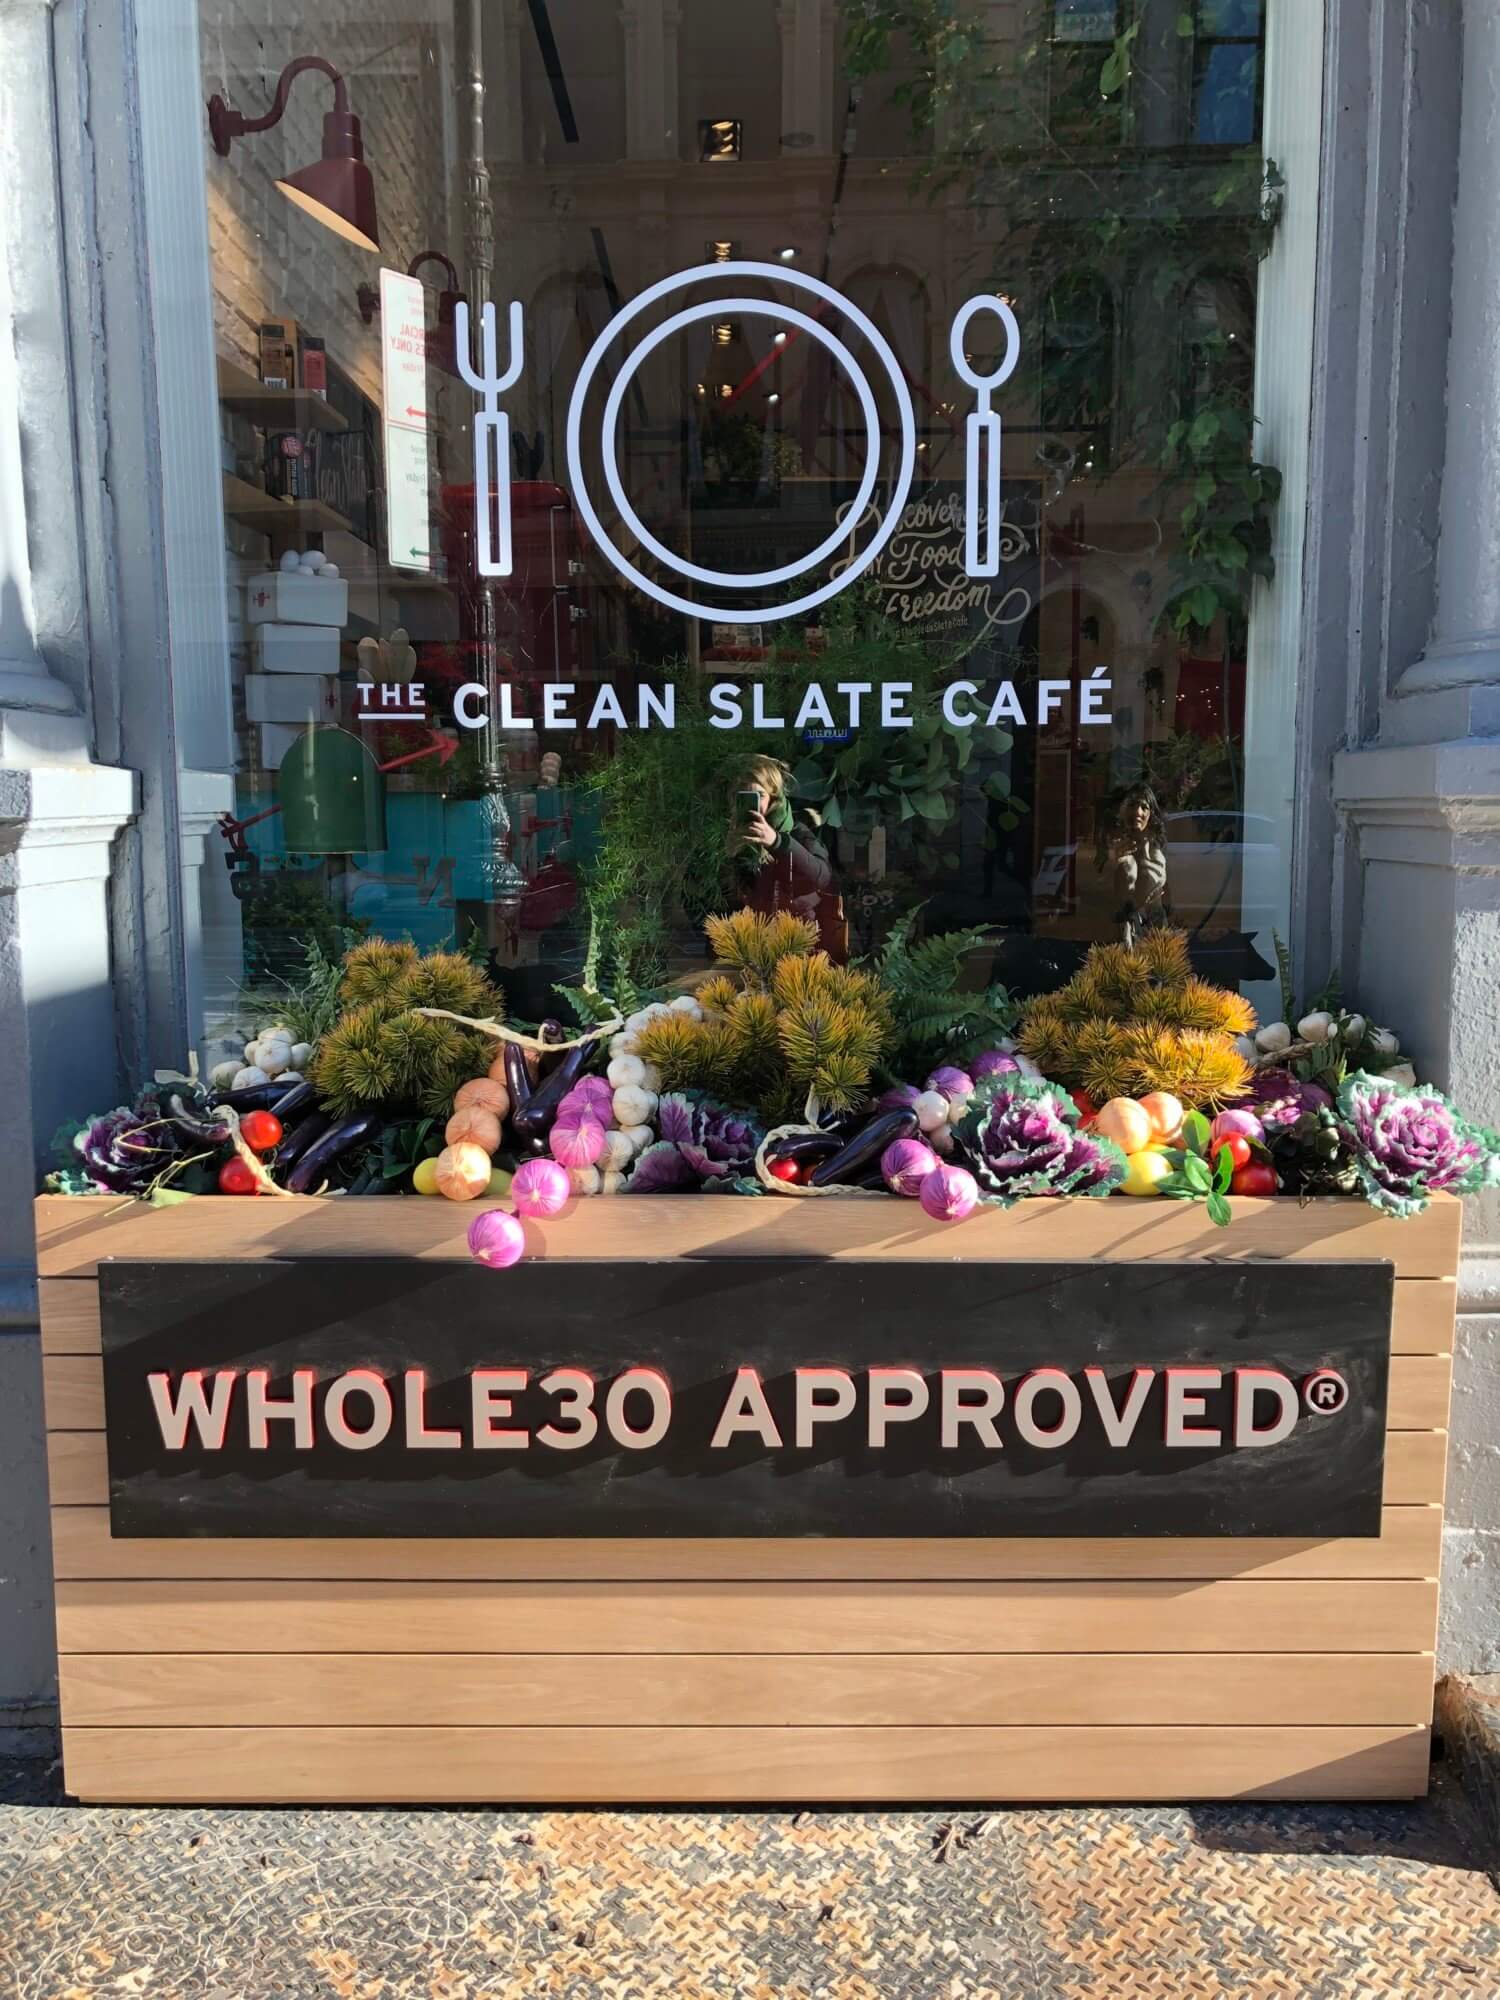 The Clean Slate Cafe